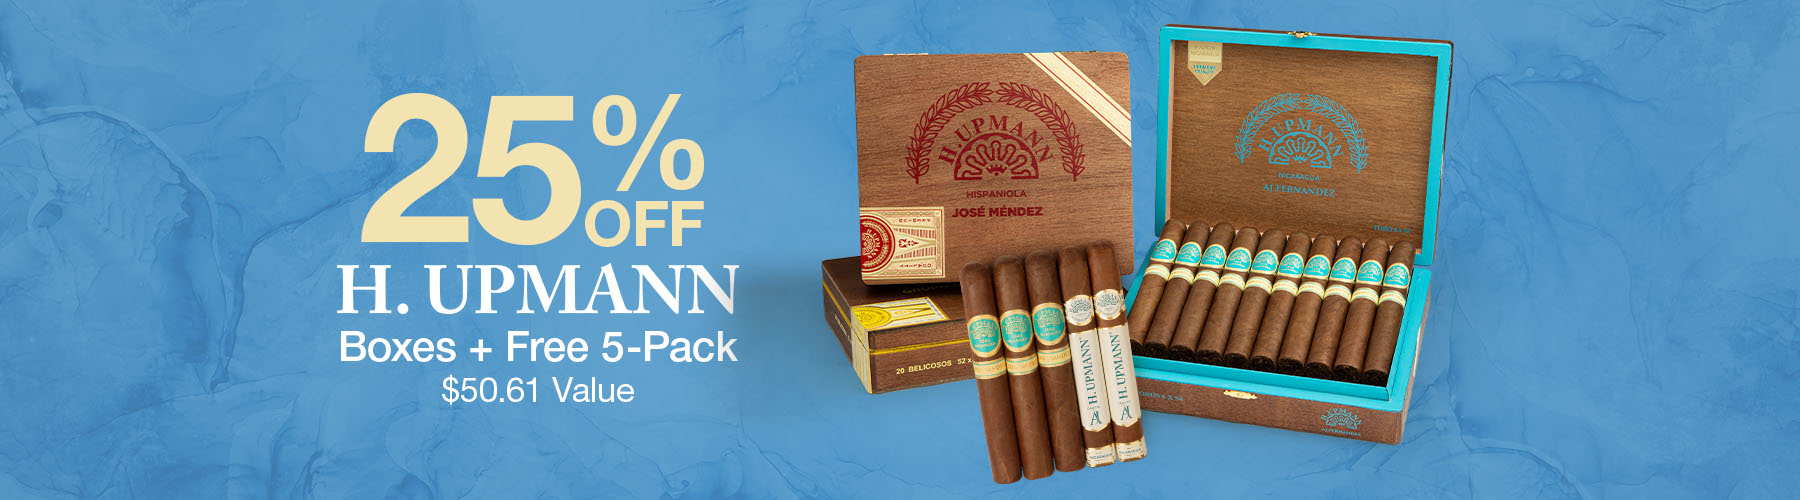 25% off H. Upmann boxes + free 5-pack!
$50.61 Value